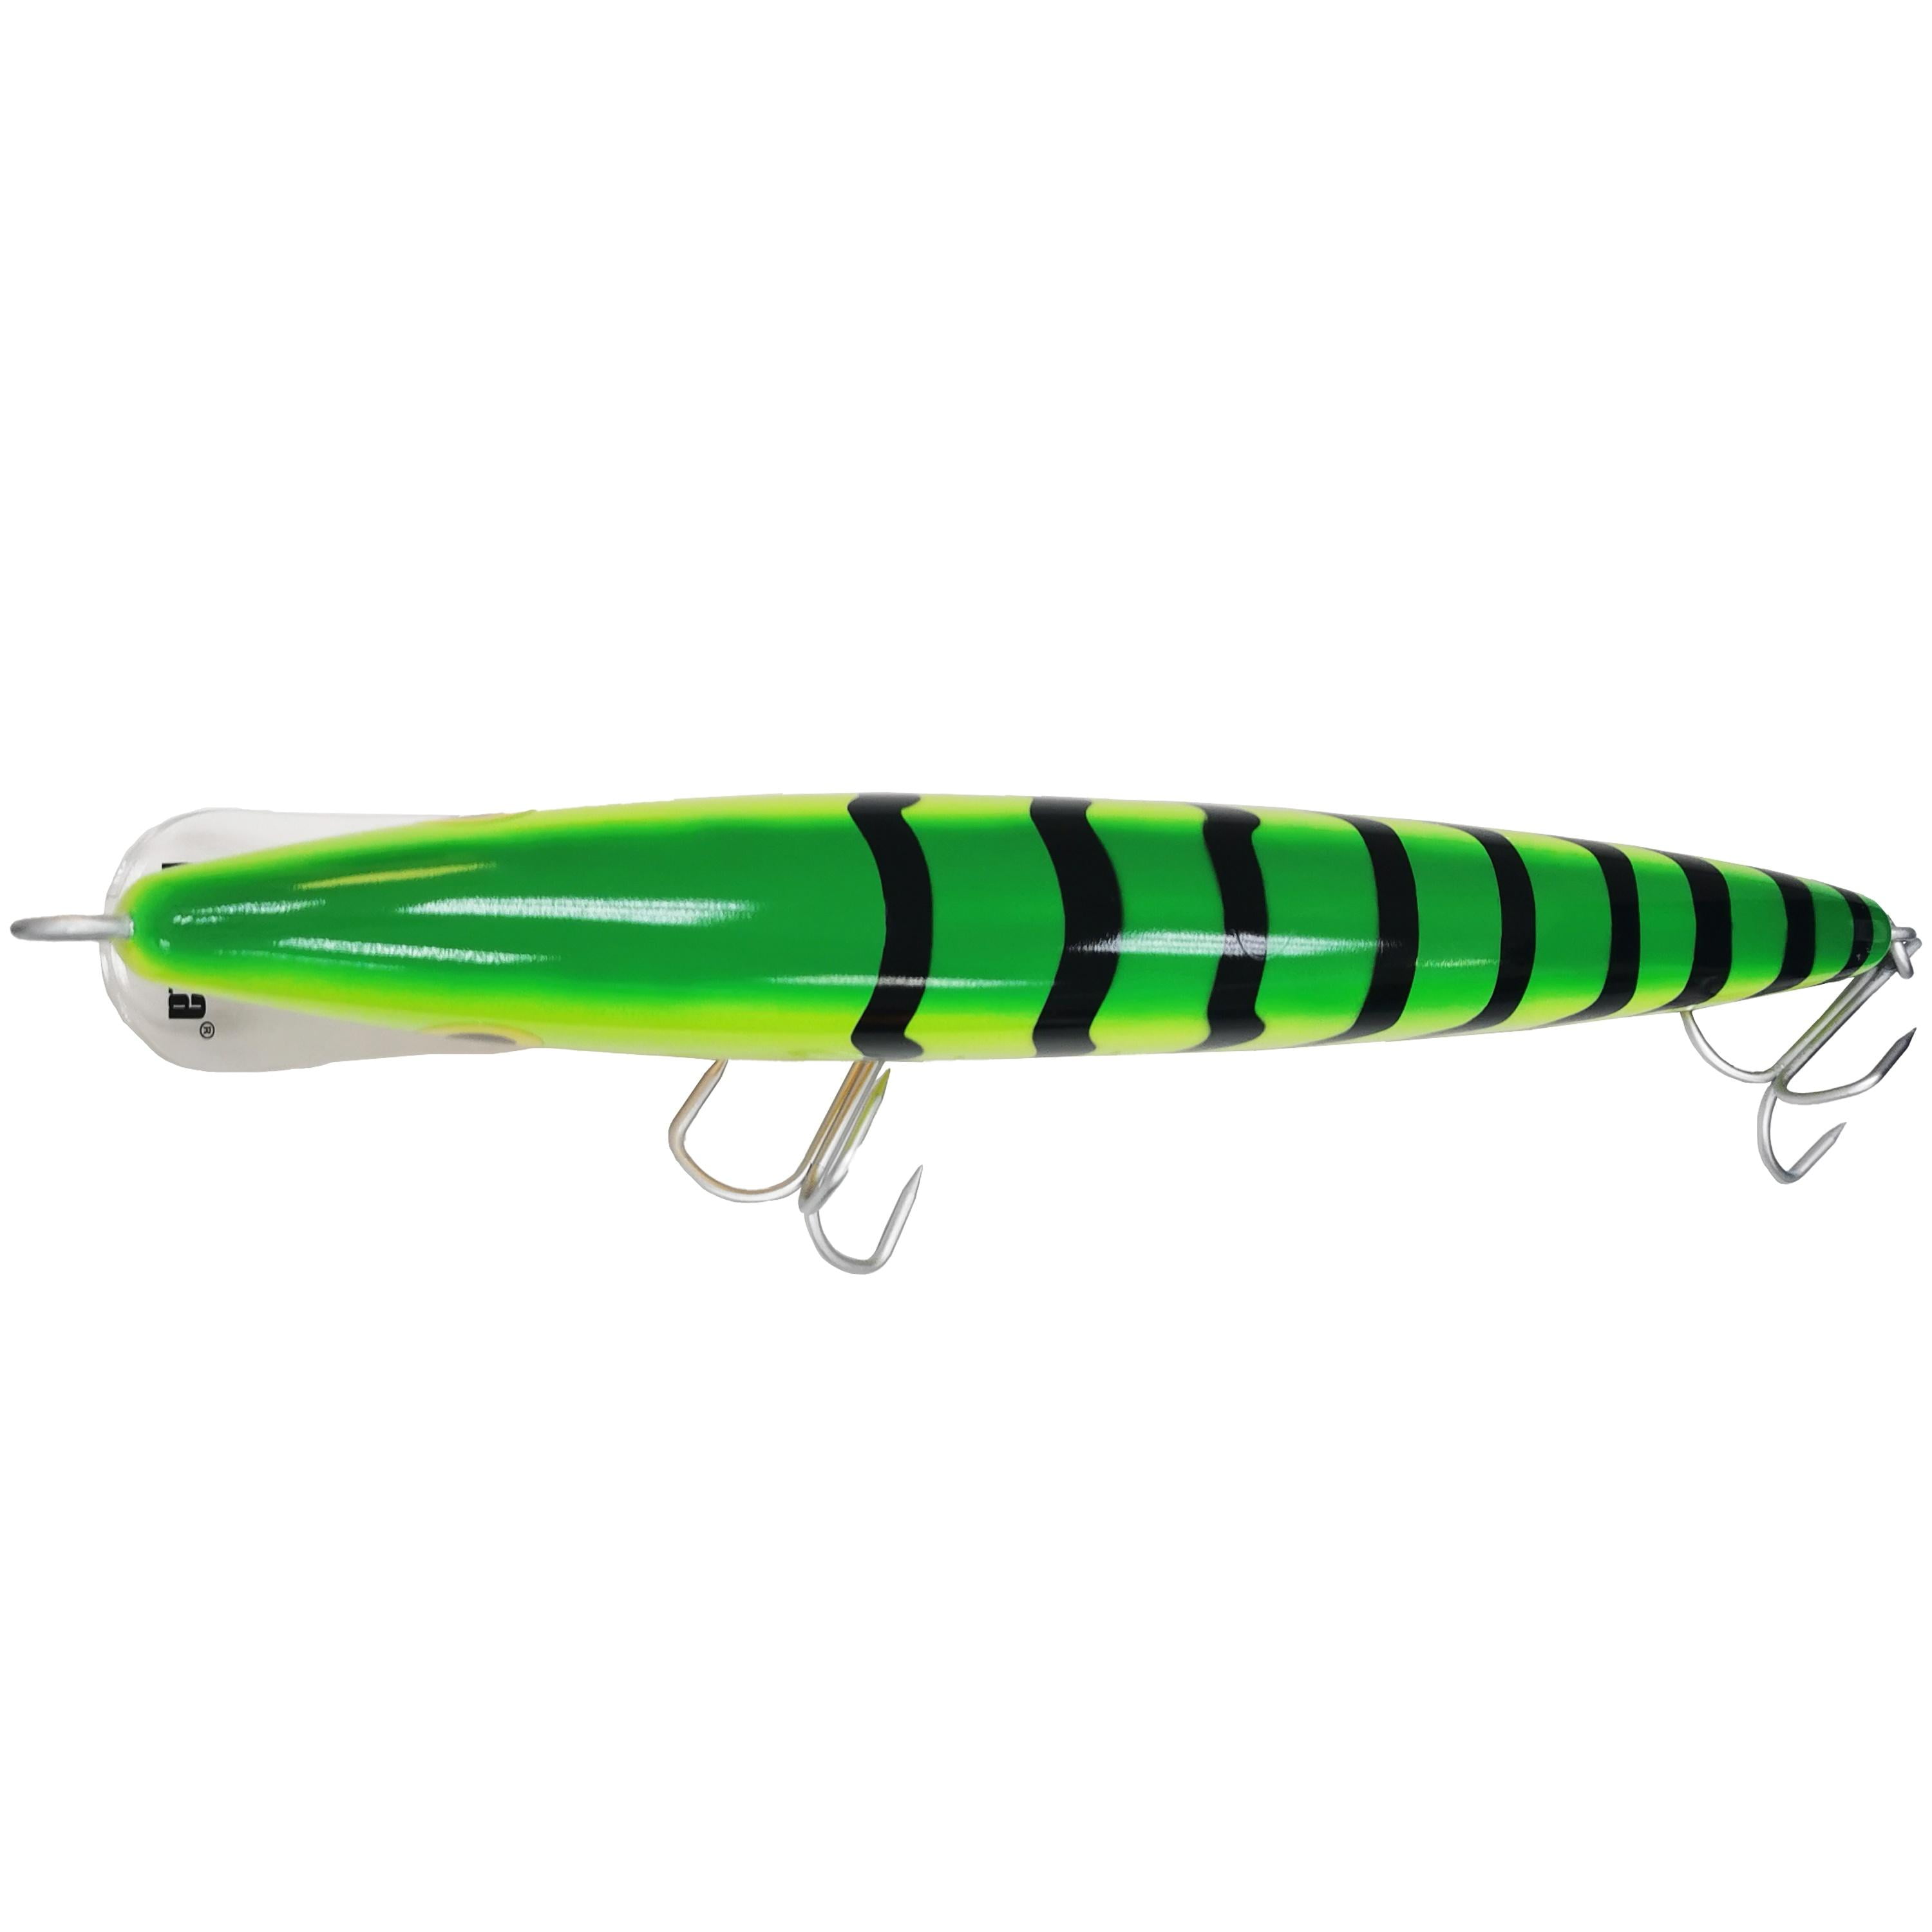 Fishing with A Rapala Original Giant Lure